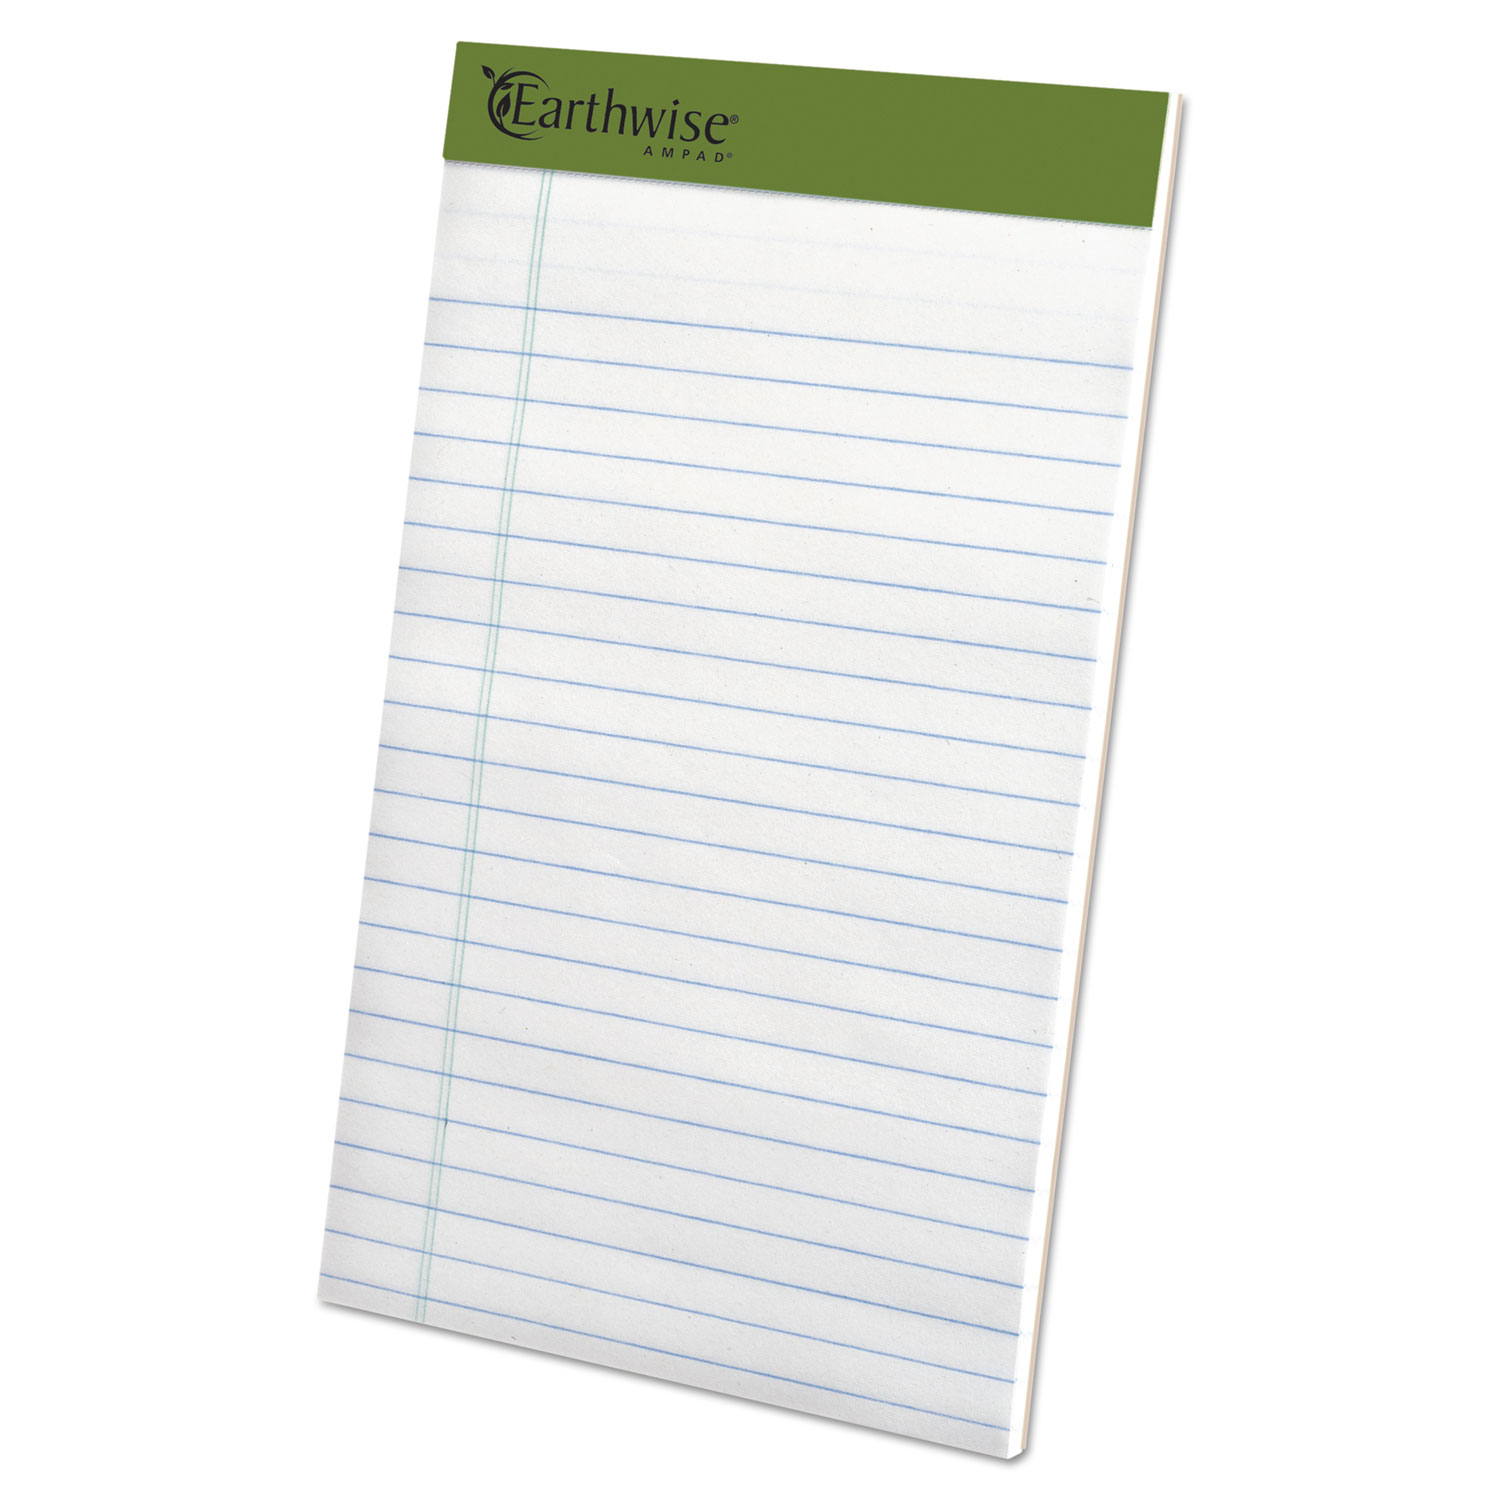  Ampad 40112R Earthwise Recycled Paper Legal Pads, Wide/Legal Rule, 5 x 8, White, 40 Sheets, 6/Pack (TOP40112) 